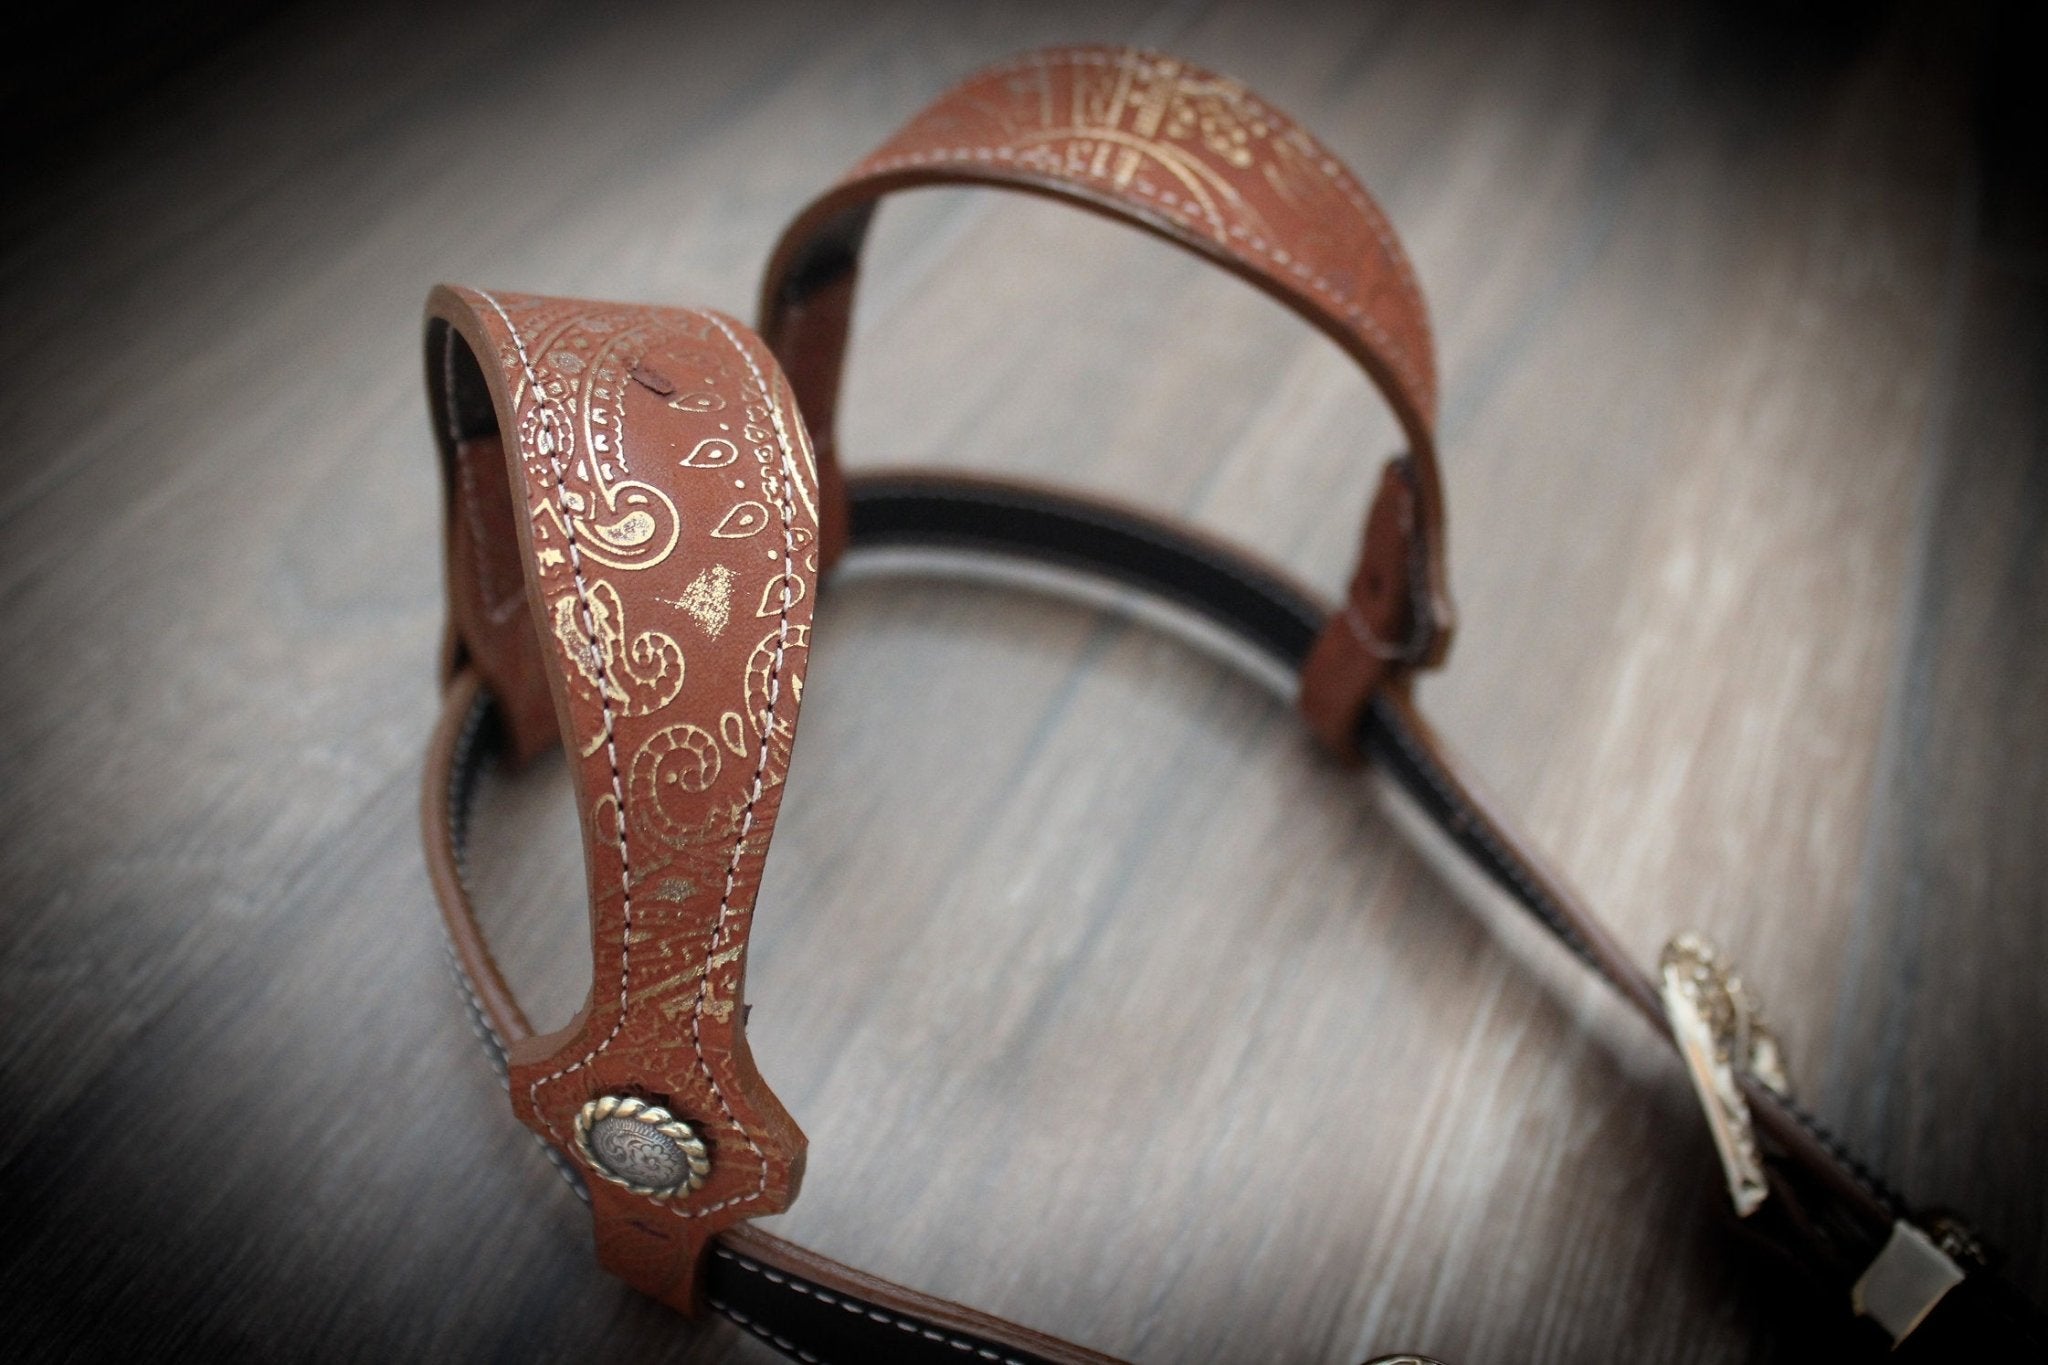 'Rune' Western Headstall Double Ear Bridle - Equiluxe Tack